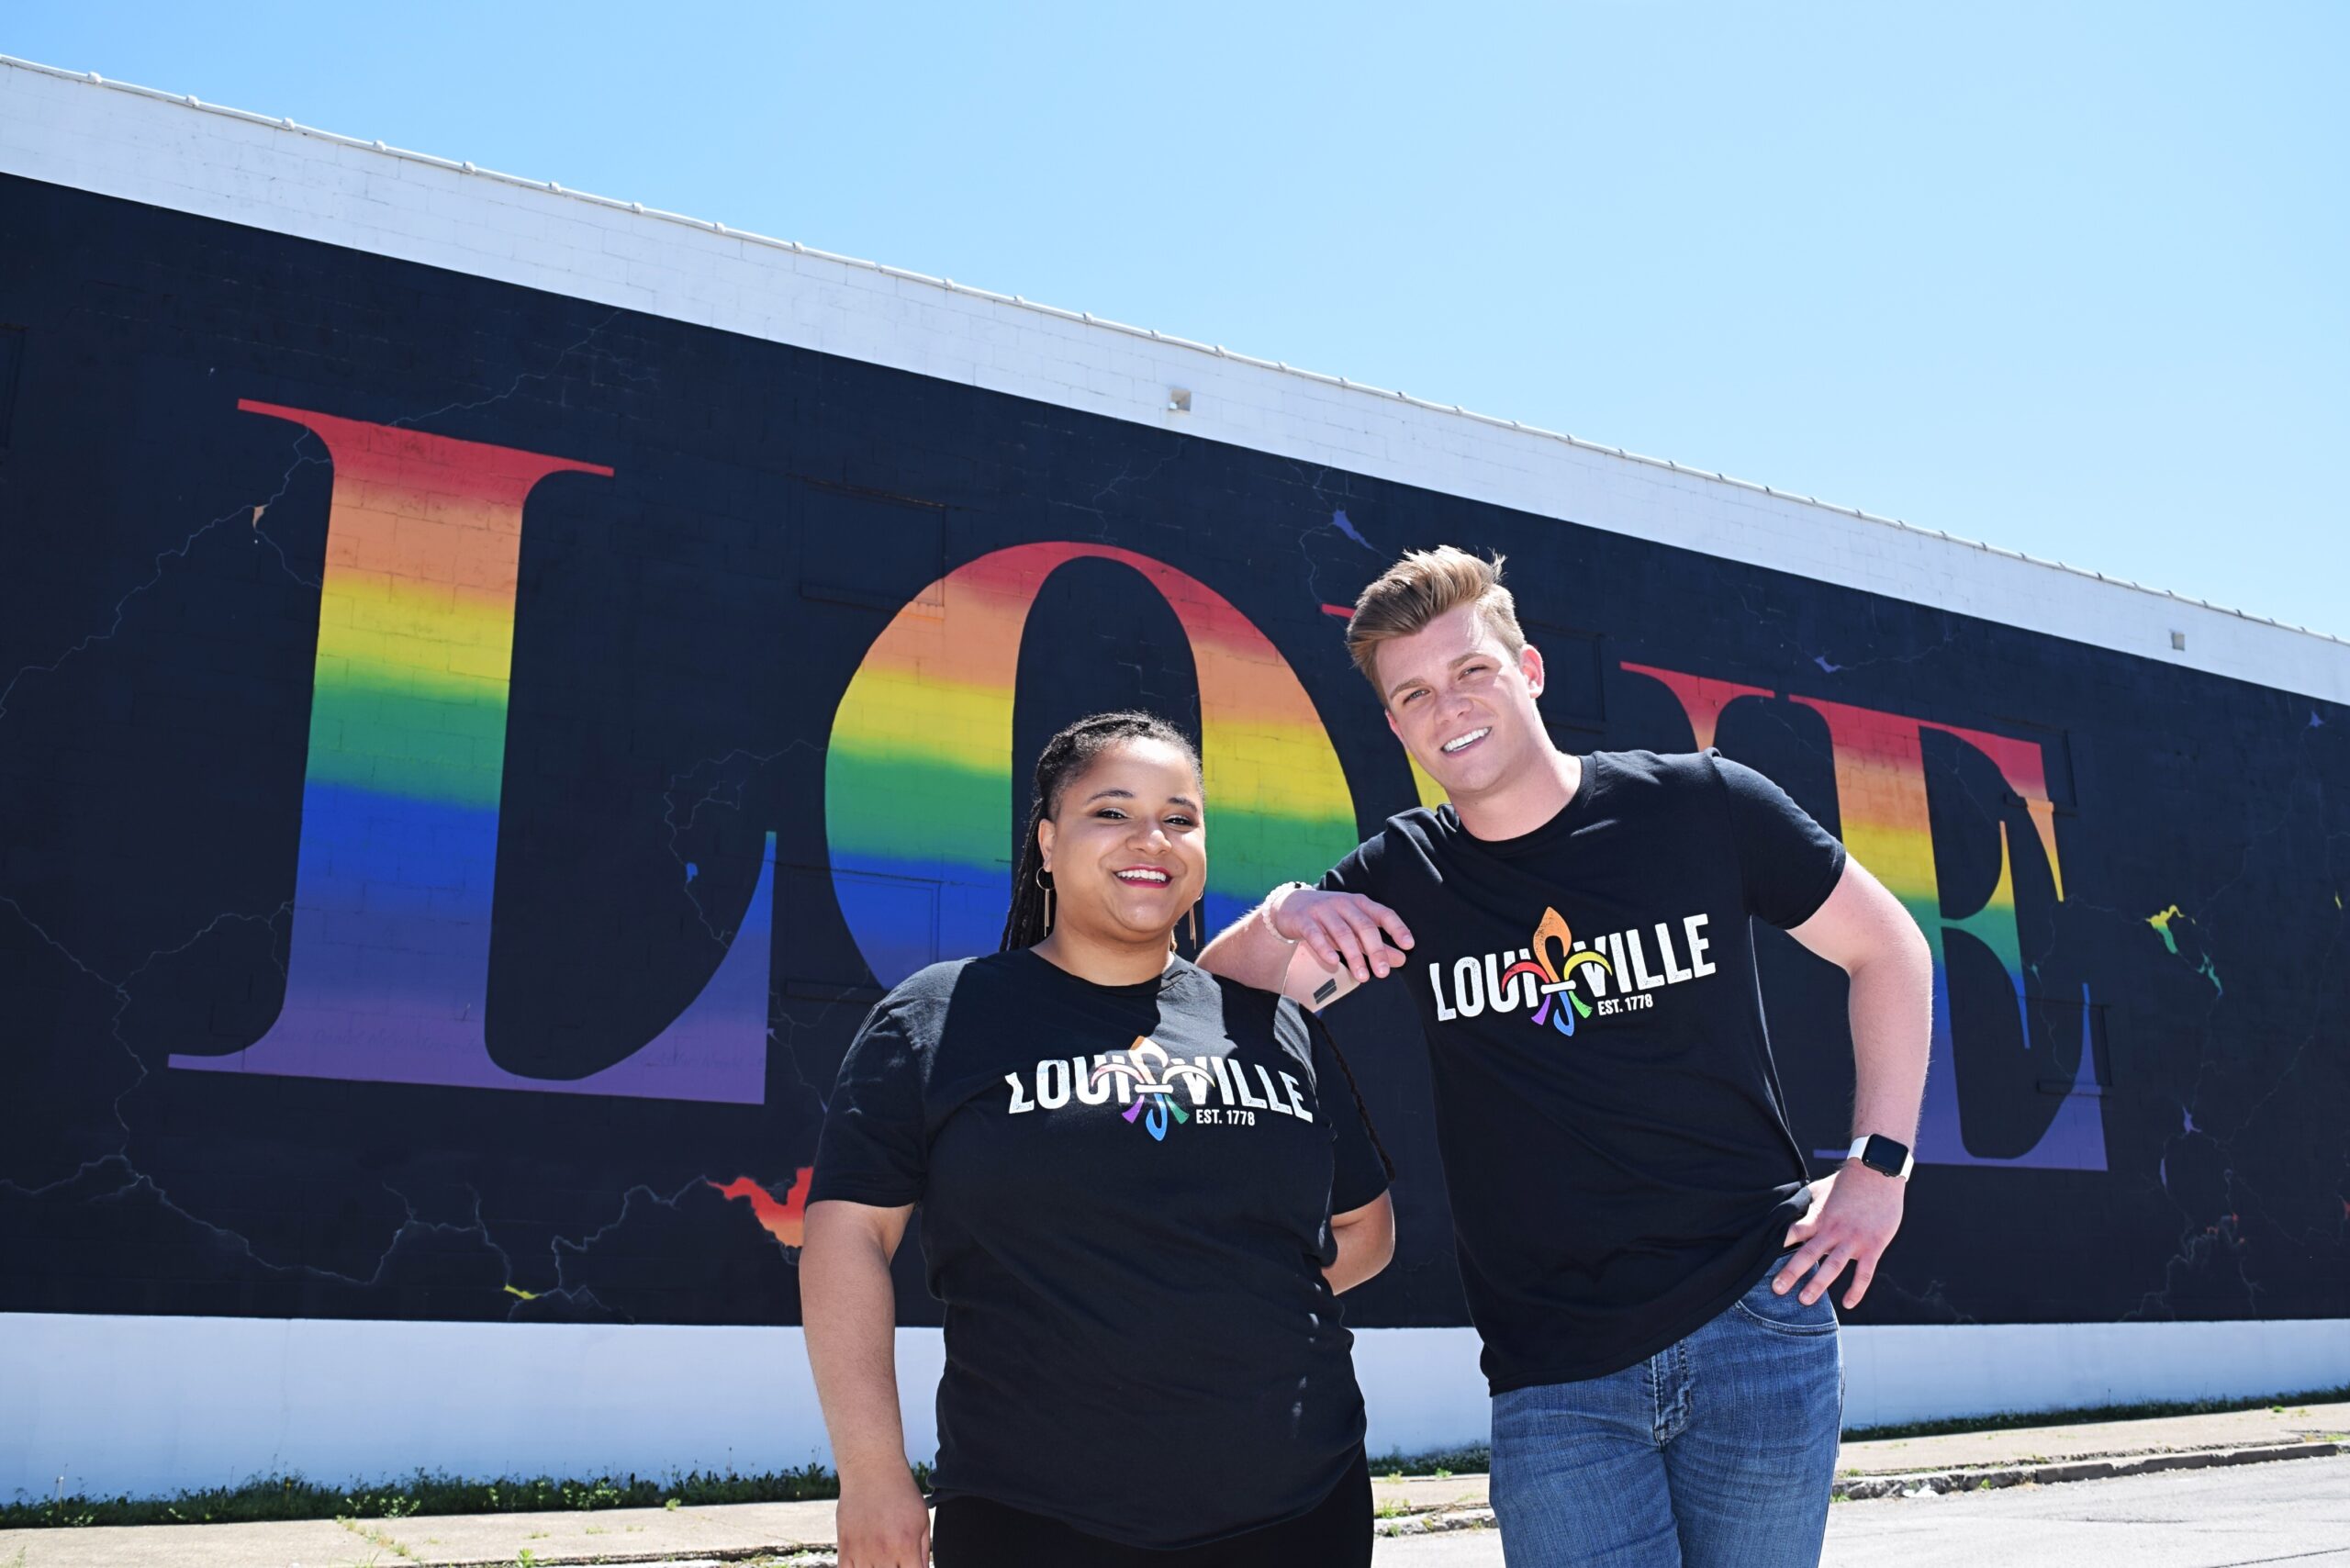 Louisville Back PrideFest and Opens LGBTQ+ Center Vacationer